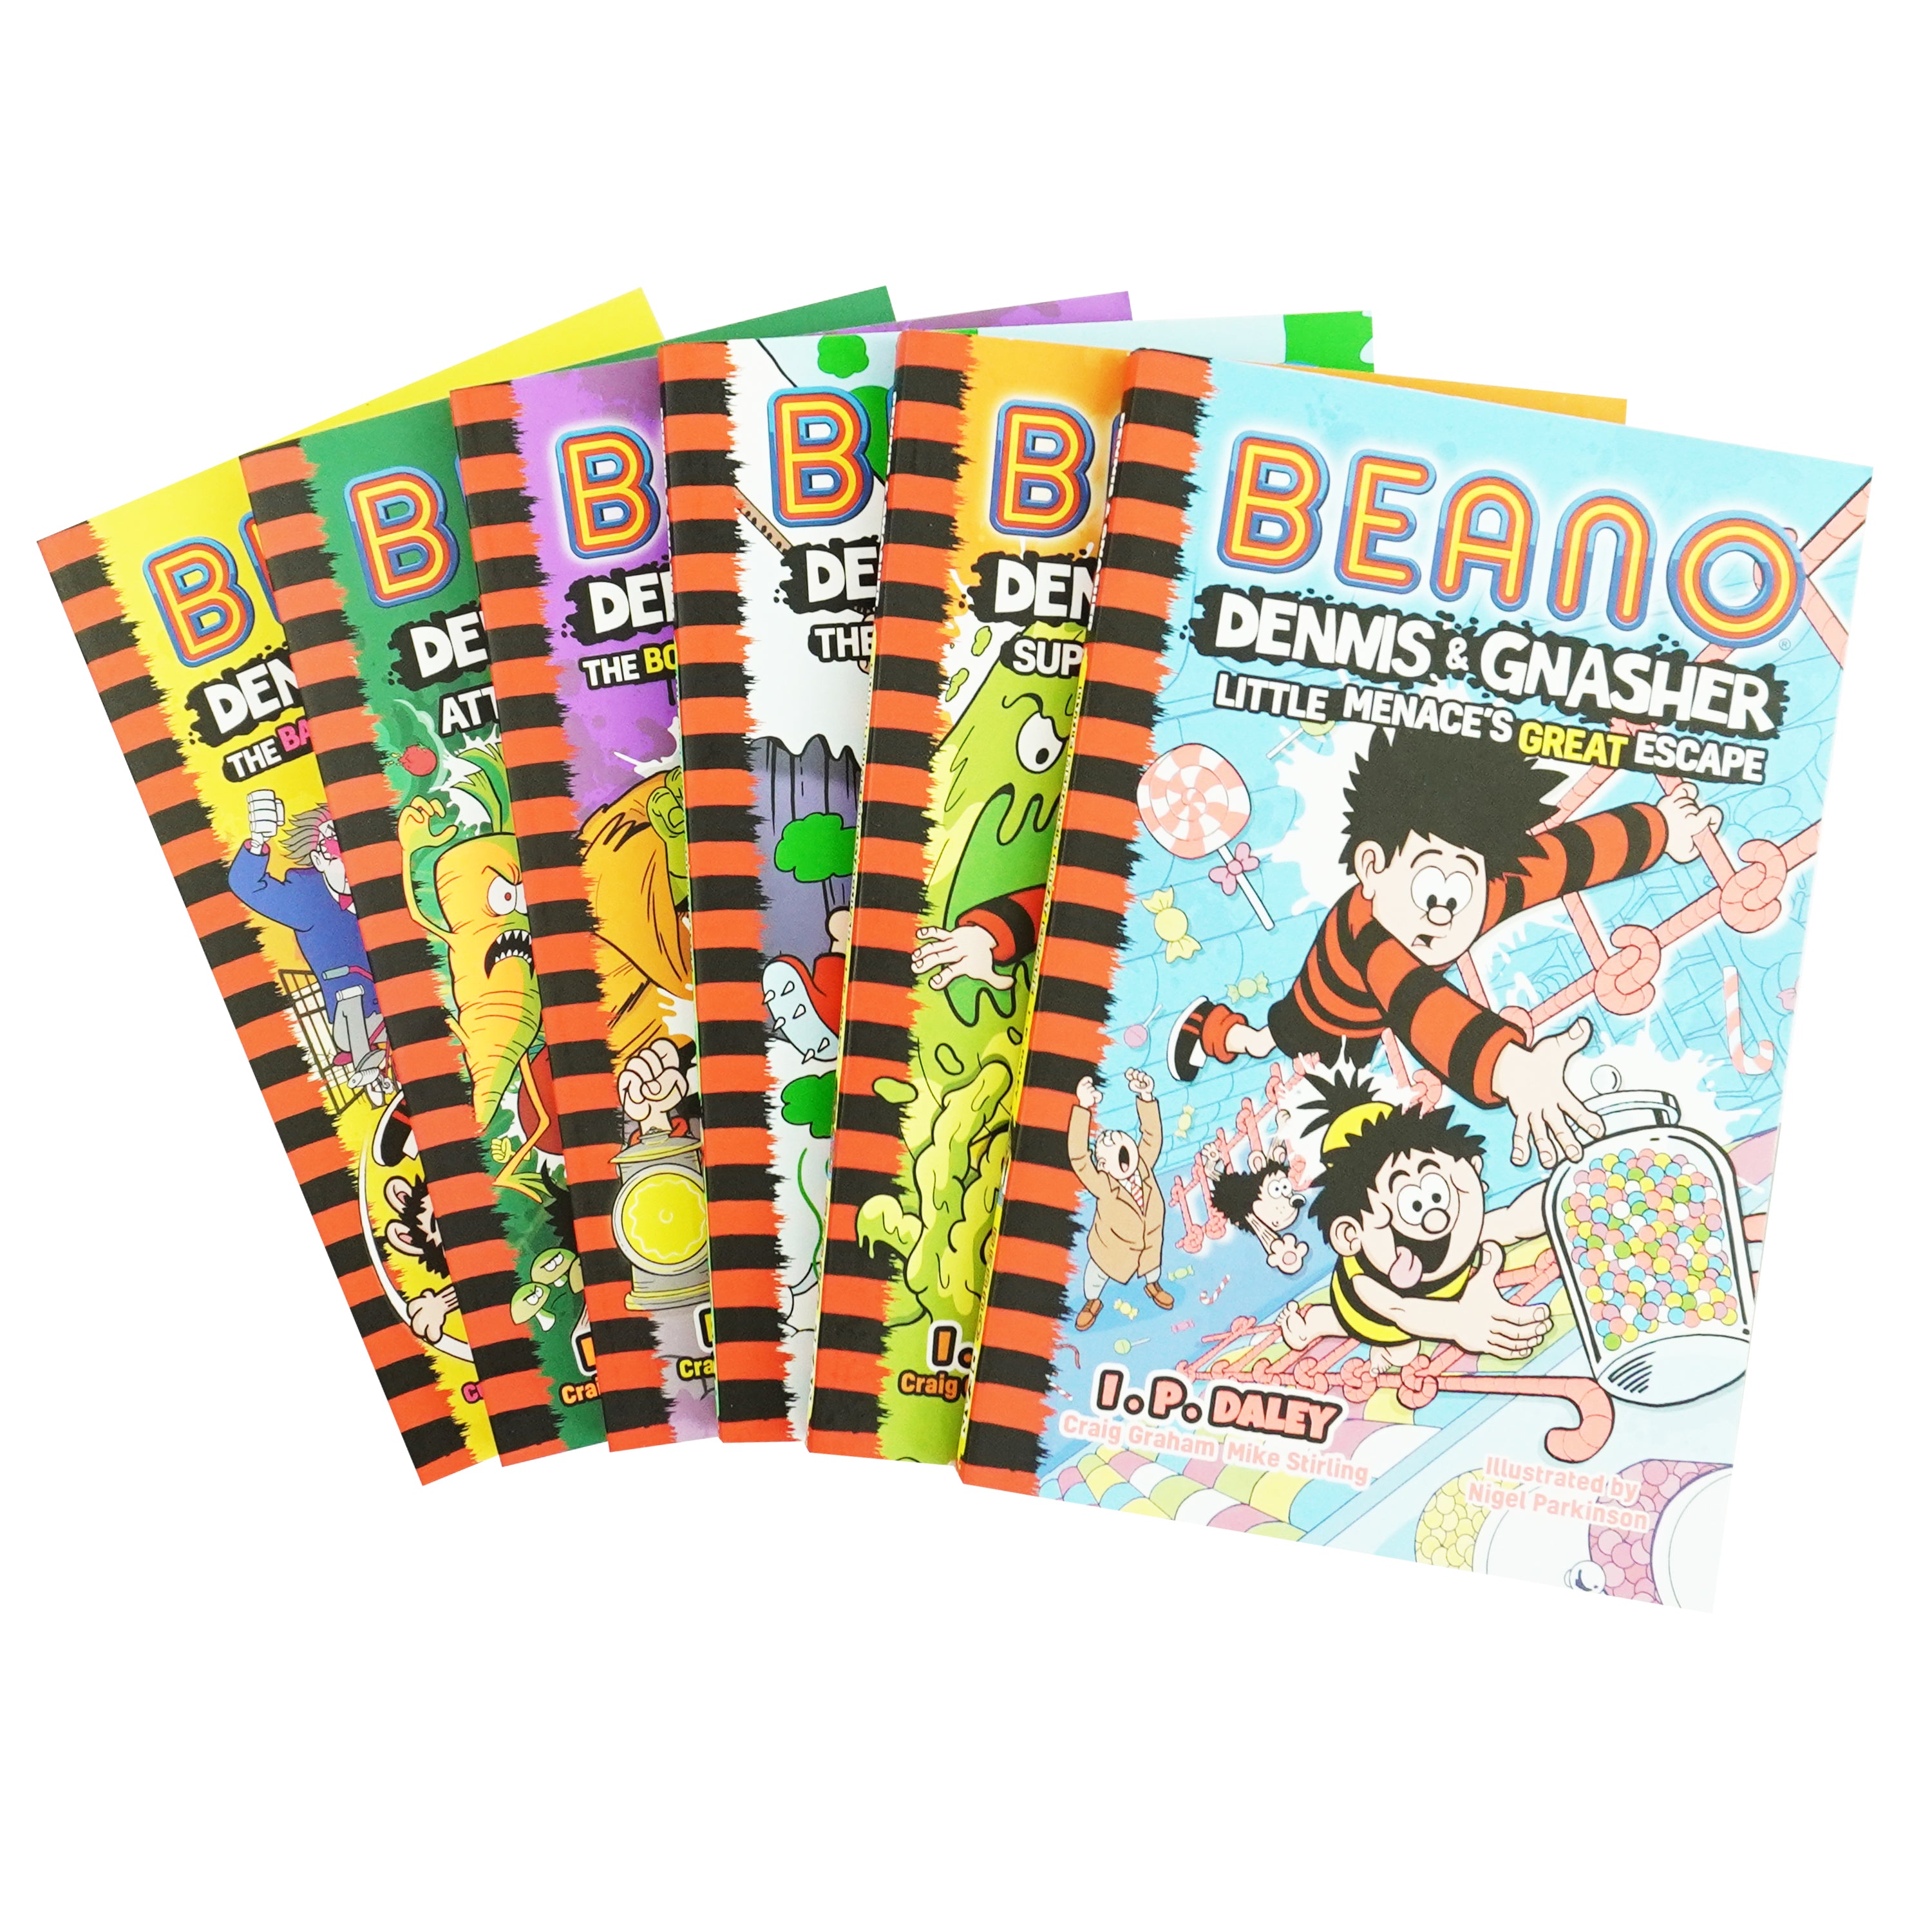 Beano Dennis & Gnasher by I. P. Daley 6 Books Collection Set  - Ages 7-10 - Paperback